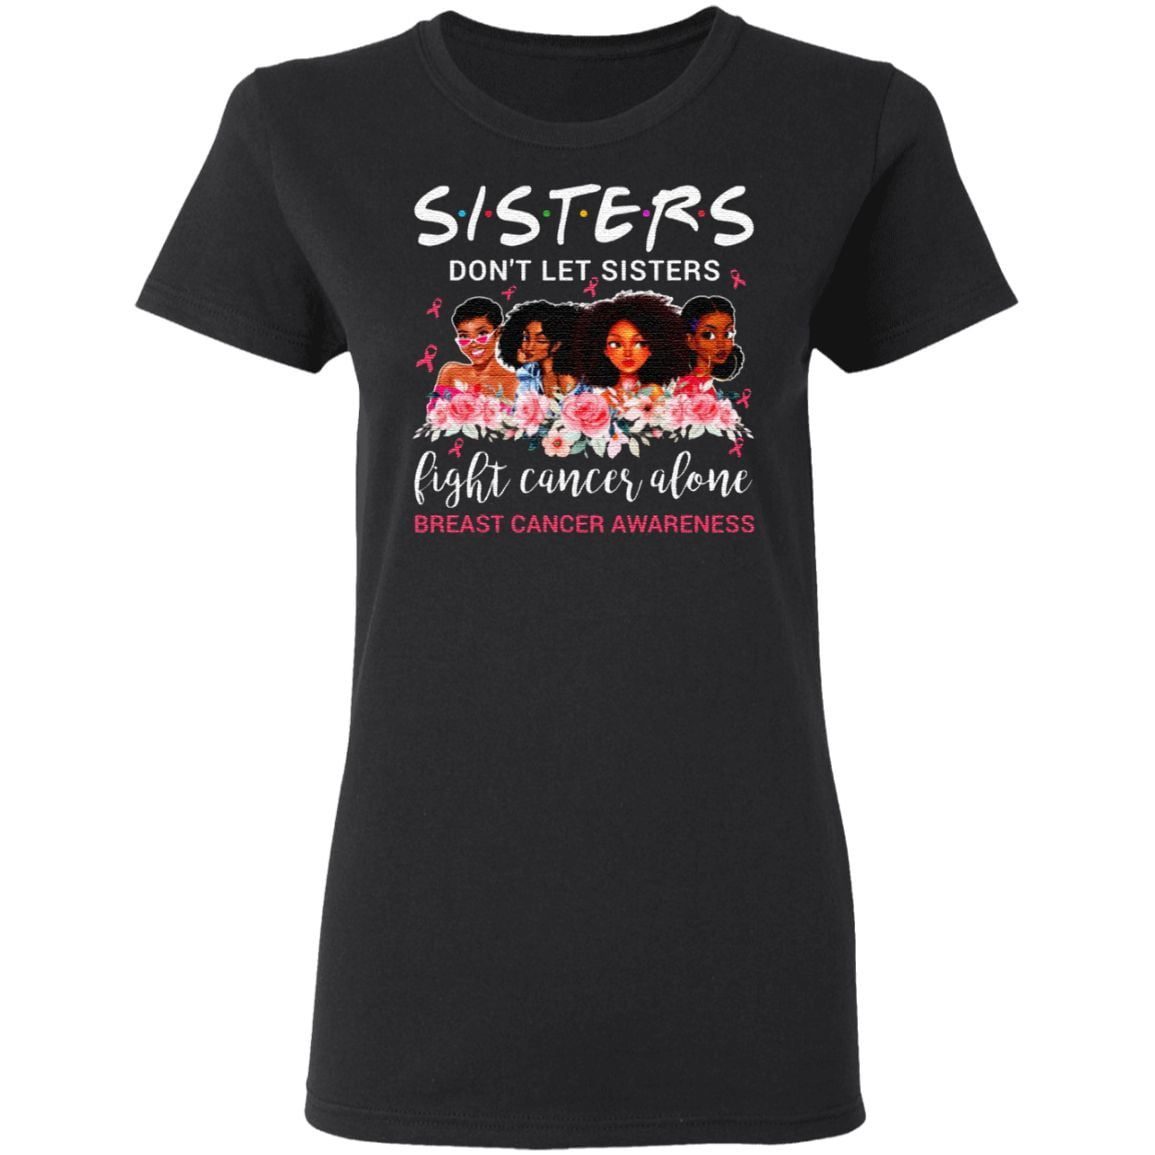 Sisters Don’t Let Sisters Fight Cancer Alone T-Shirt